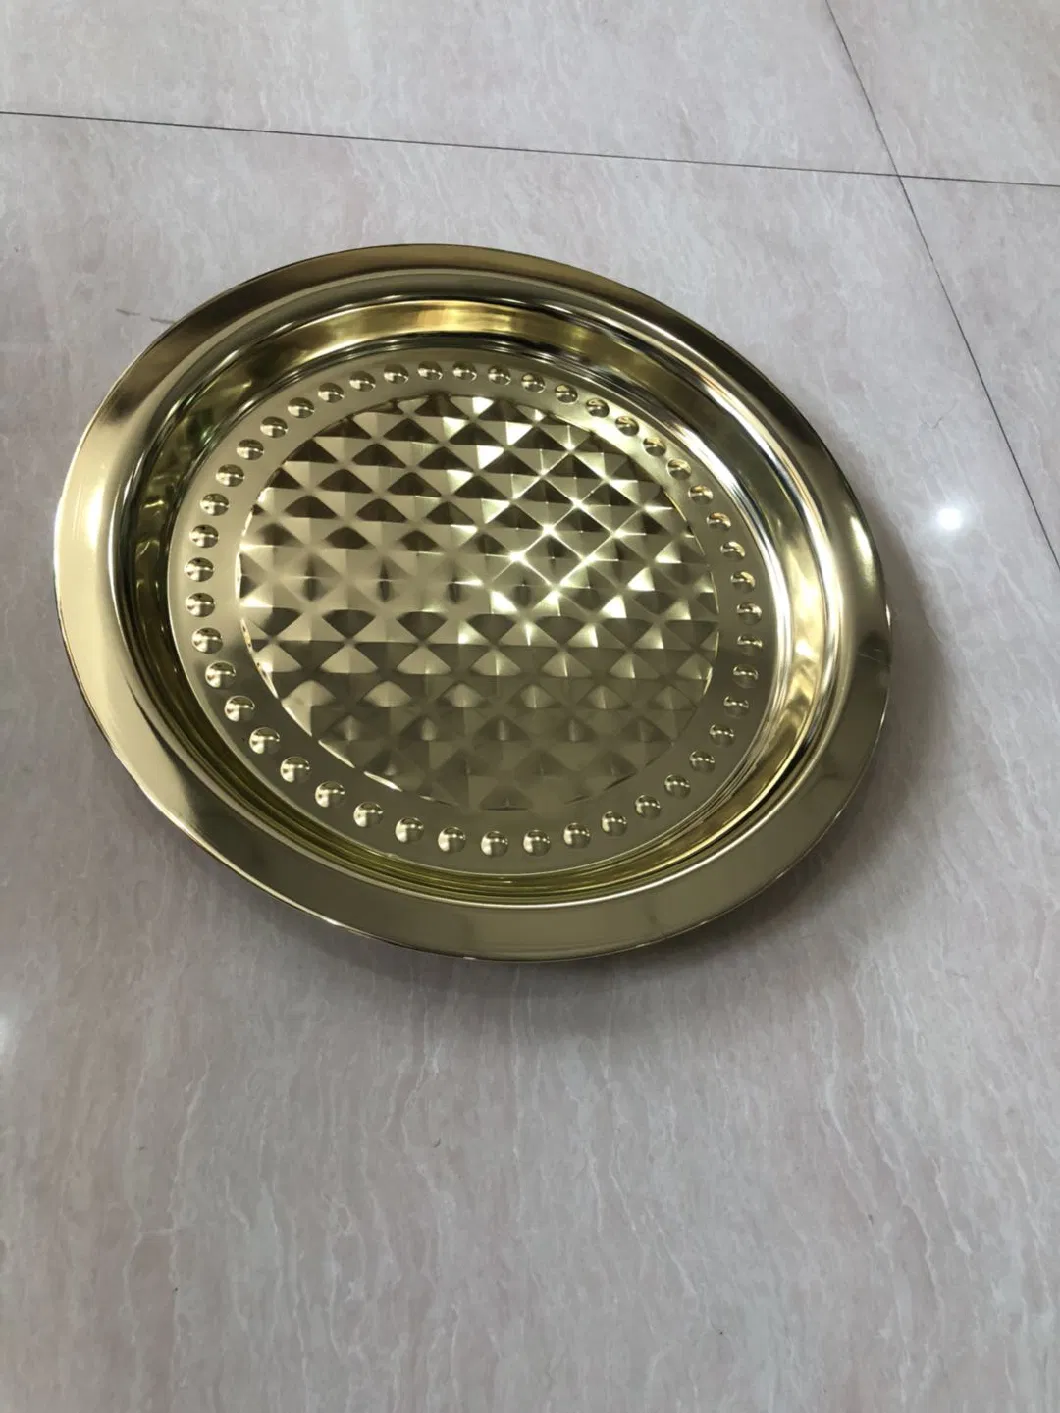 Stainless Steel Serving Tray Metal Round Food Dinner Diamond Plates Fruit